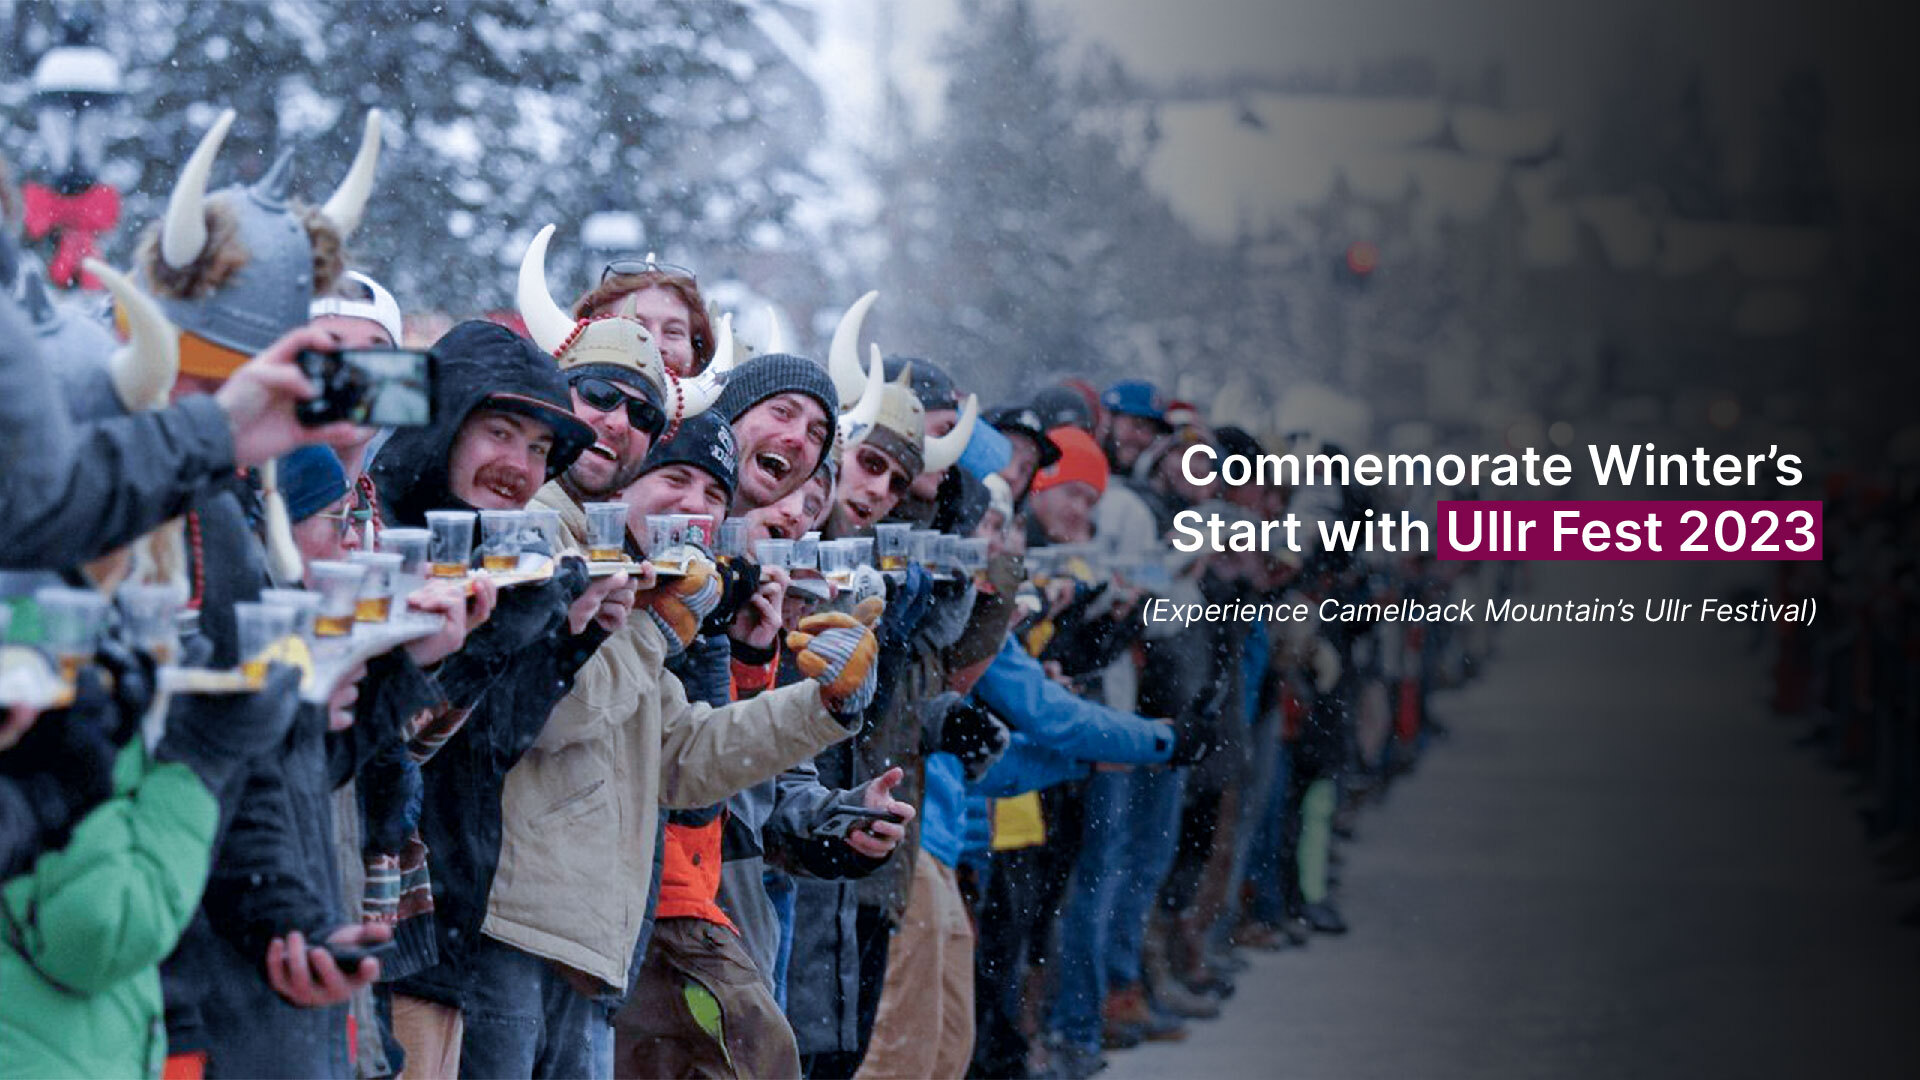 Commemorate Winter’s Start with Ullr Fest 2023